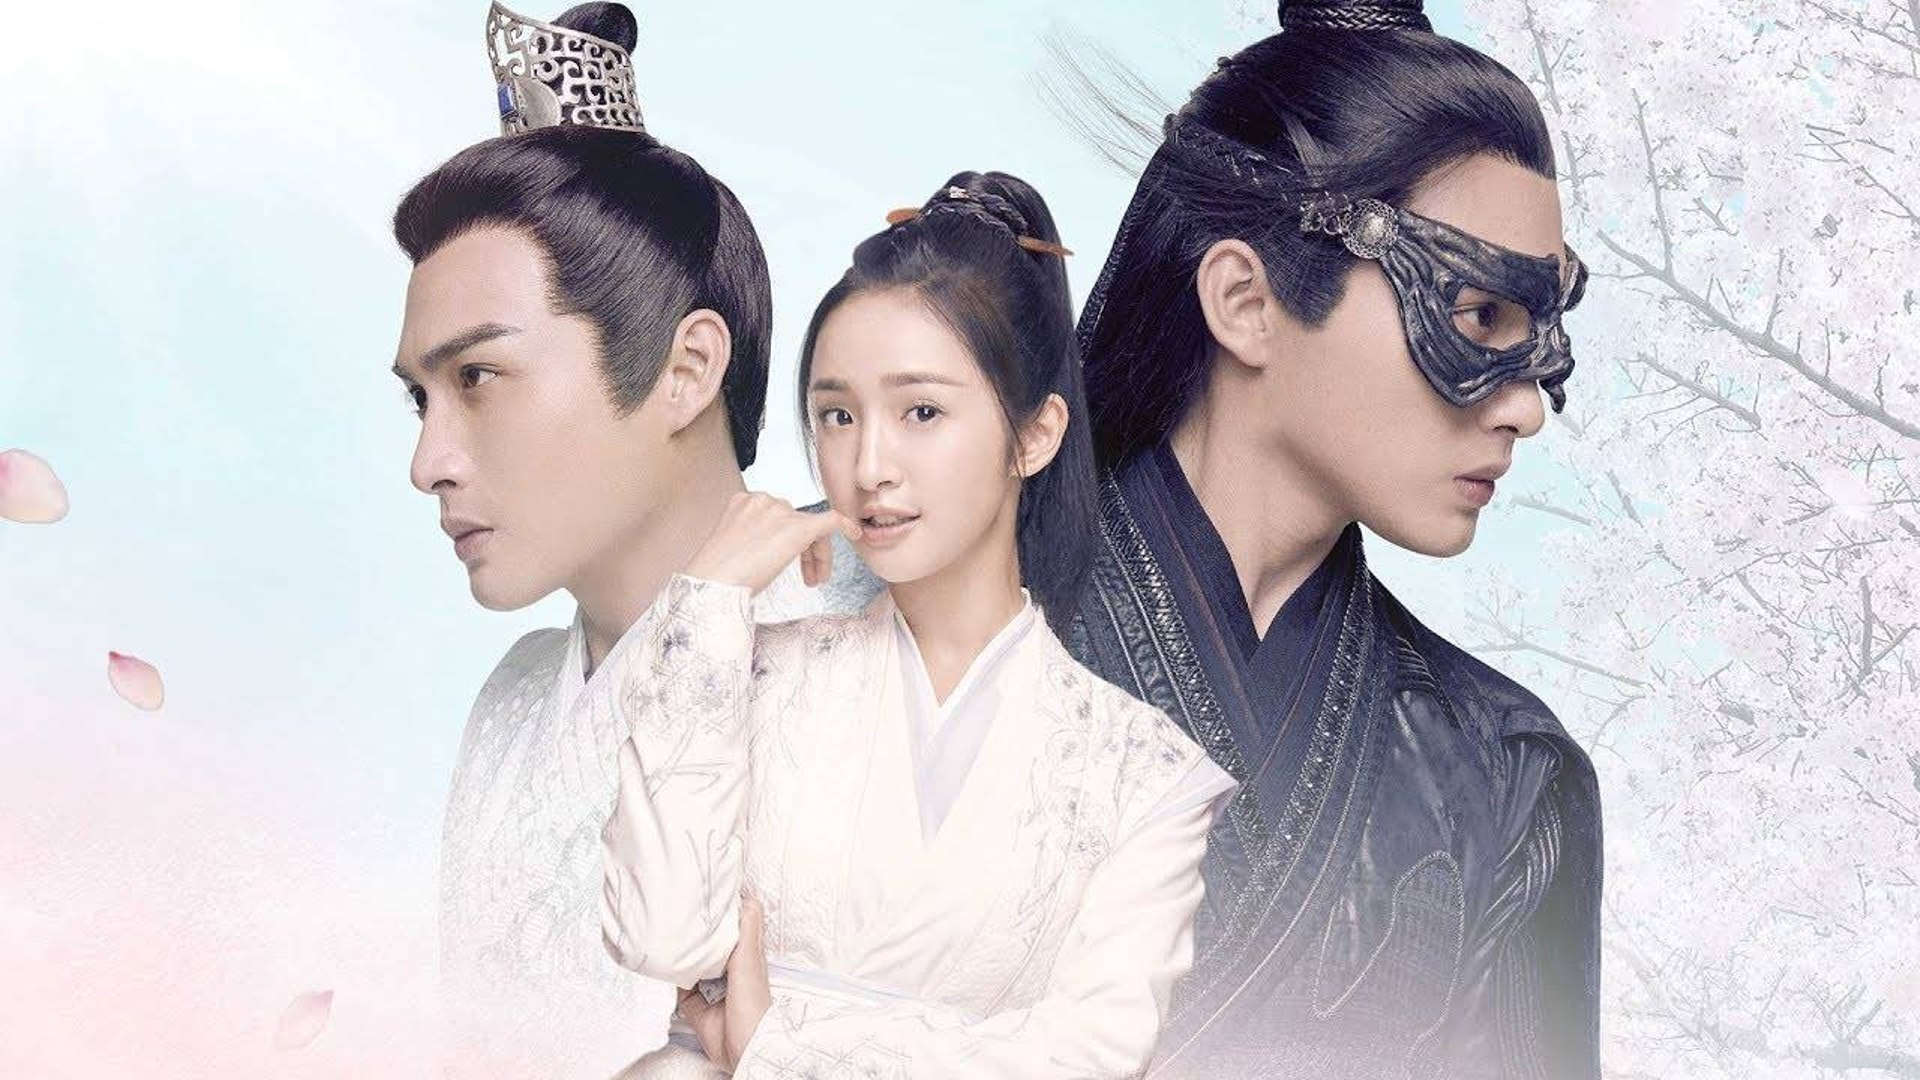 Updated: Top 10 Chinese Dramas You Should Watch for 2019.